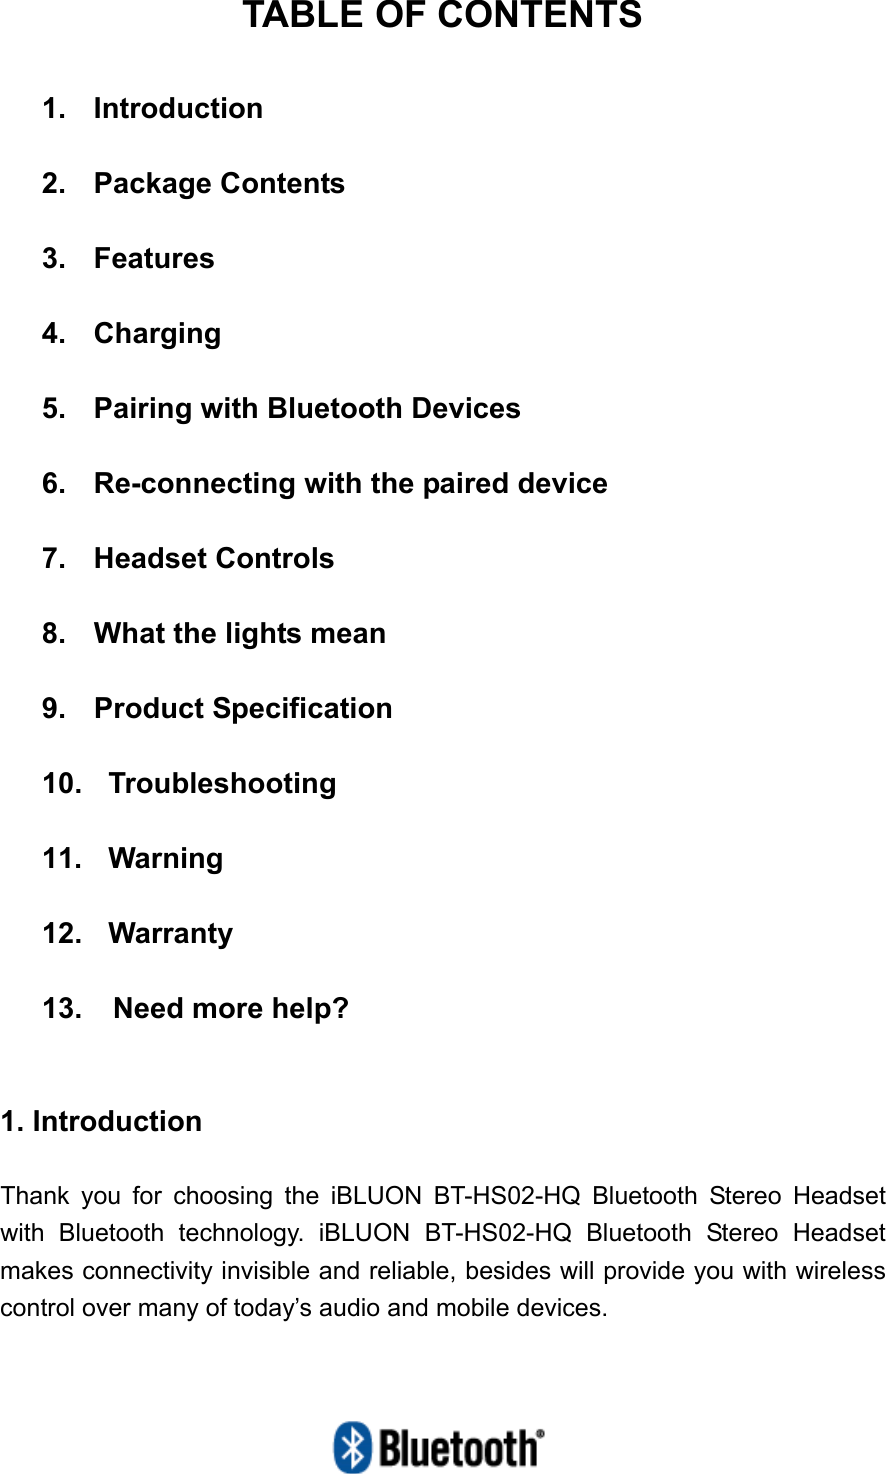   TABLE OF CONTENTS  1.  Introduction  2.  Package Contents  3.  Features  4.  Charging  5.    Pairing with Bluetooth Devices  6.    Re-connecting with the paired device  7.  Headset Controls  8.  What the lights mean  9. Product Specification  10.  Troubleshooting  11.  Warning  12.  Warranty  13.  Need more help?   1. Introduction  Thank you for choosing the iBLUON BT-HS02-HQ Bluetooth Stereo Headset with Bluetooth technology. iBLUON BT-HS02-HQ Bluetooth Stereo Headset makes connectivity invisible and reliable, besides will provide you with wireless control over many of today’s audio and mobile devices. 